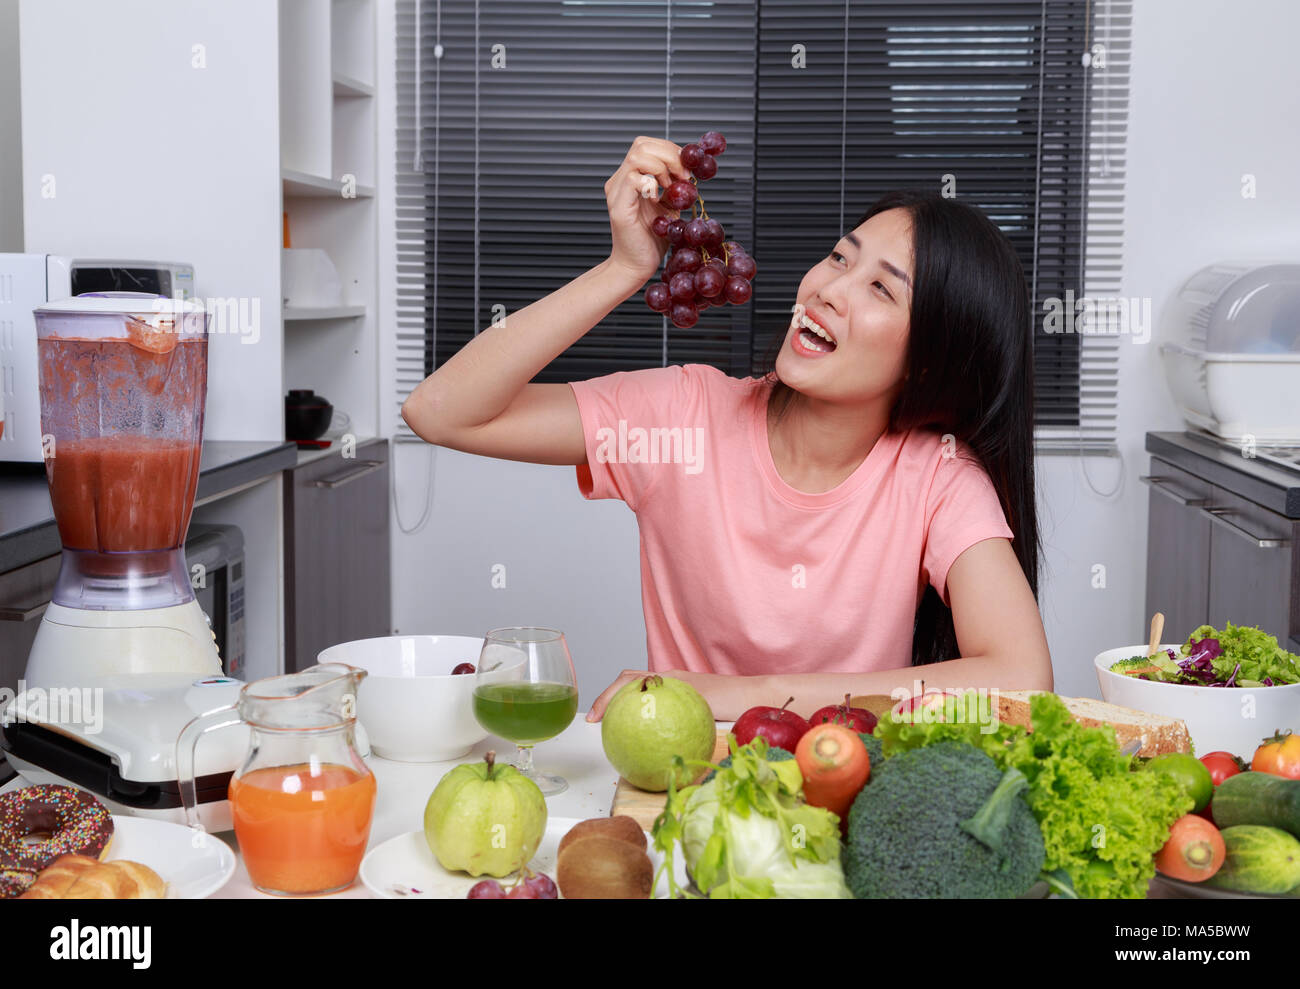 young woman eating grape in kitchen room Stock Photo